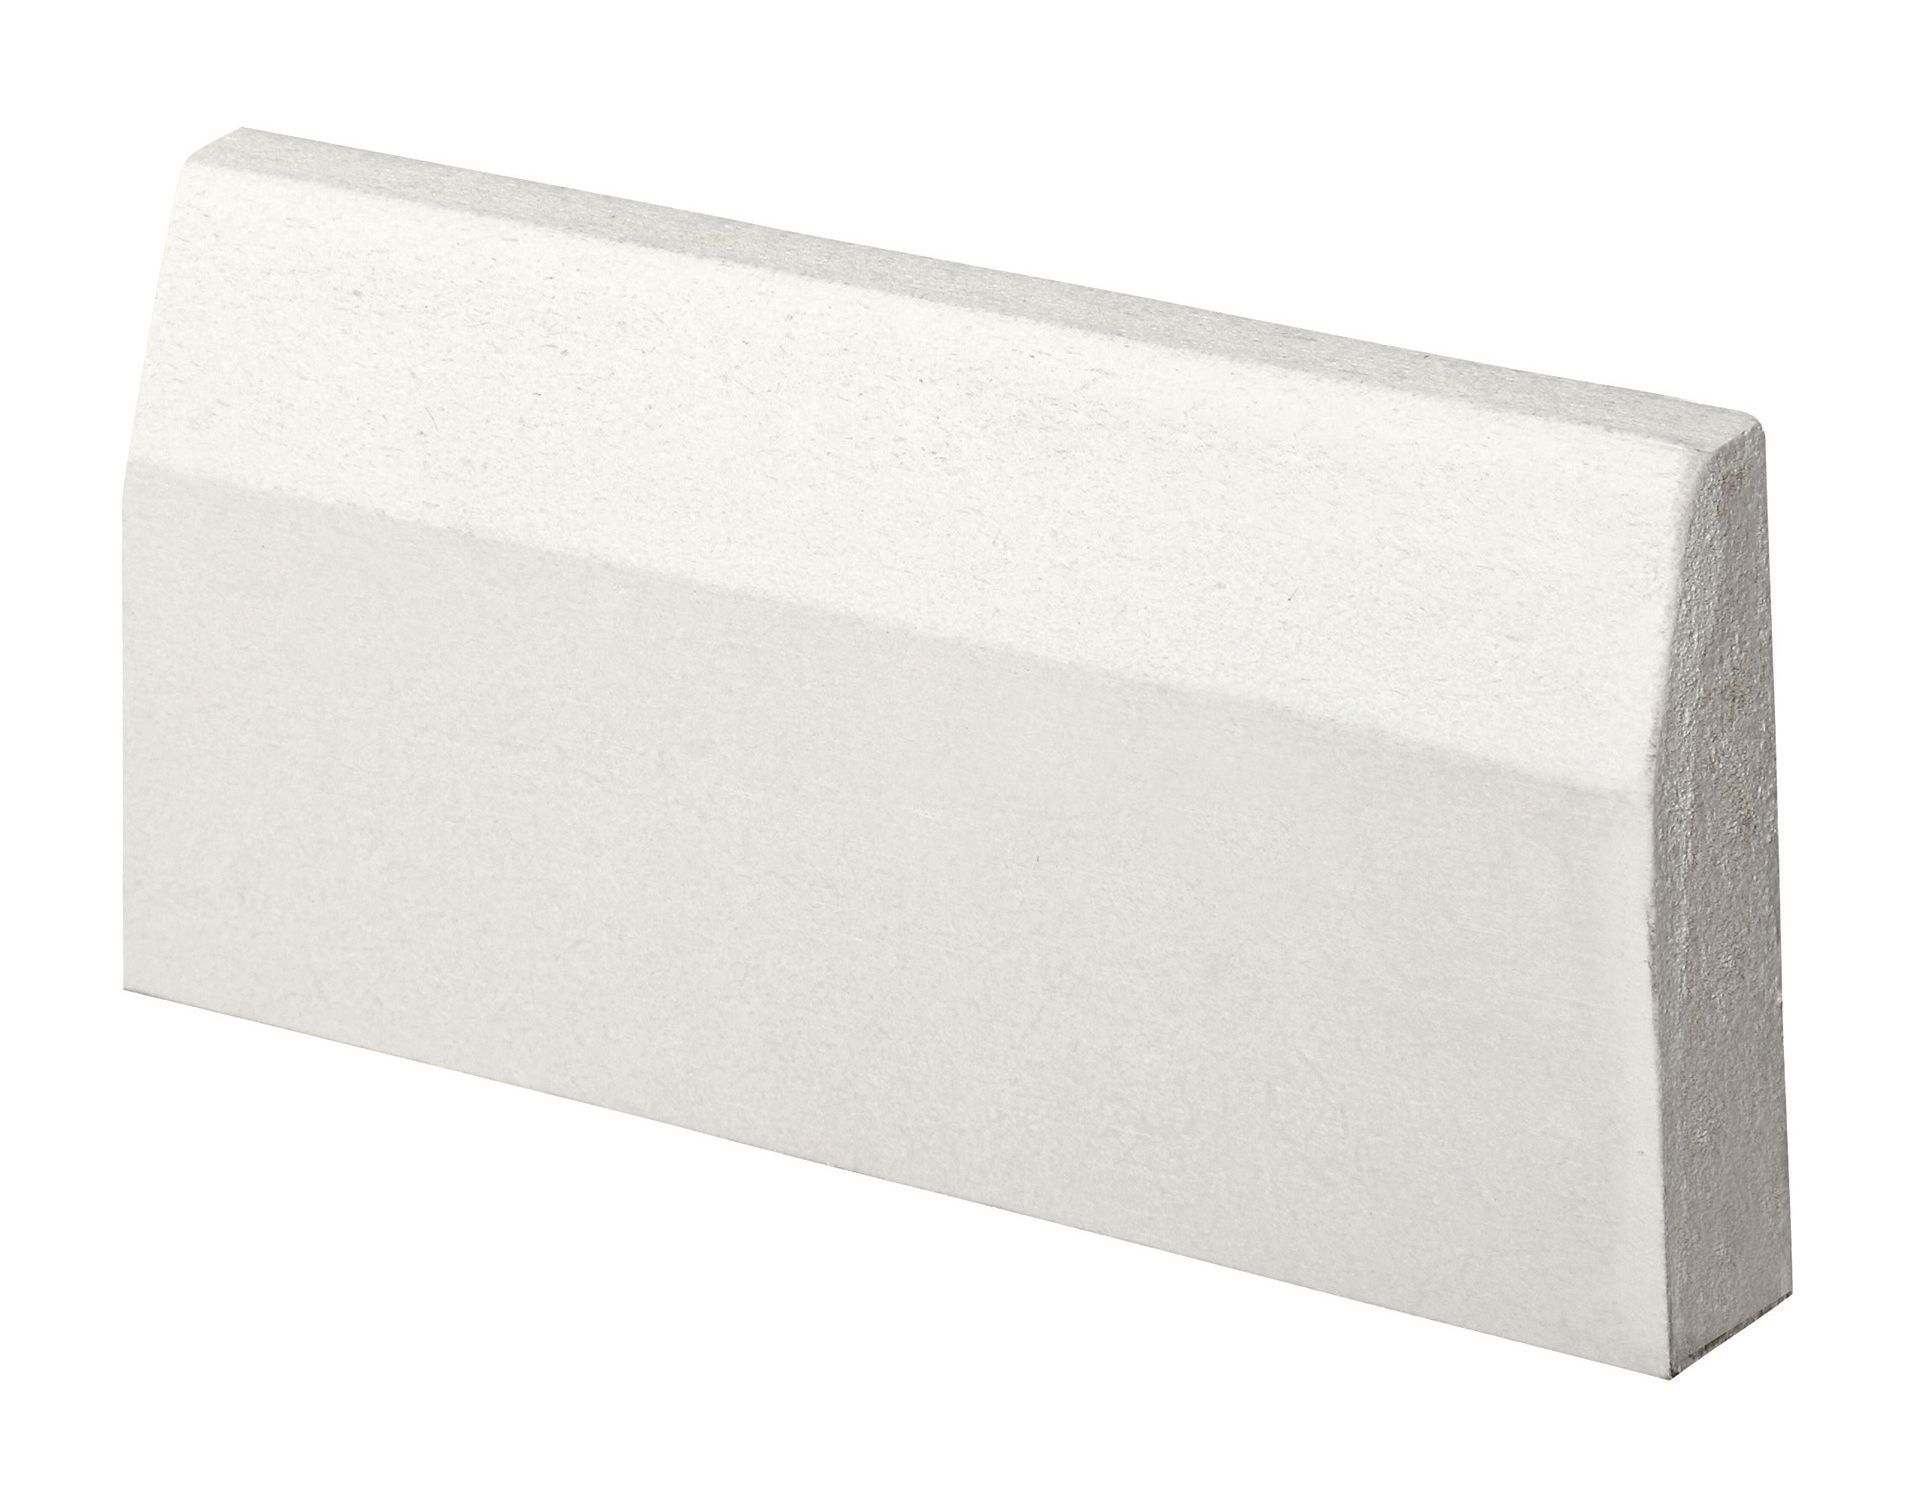 Image of Wickes Chamfered Primed MDF Architrave - 18mm x 69mm x 2.1m